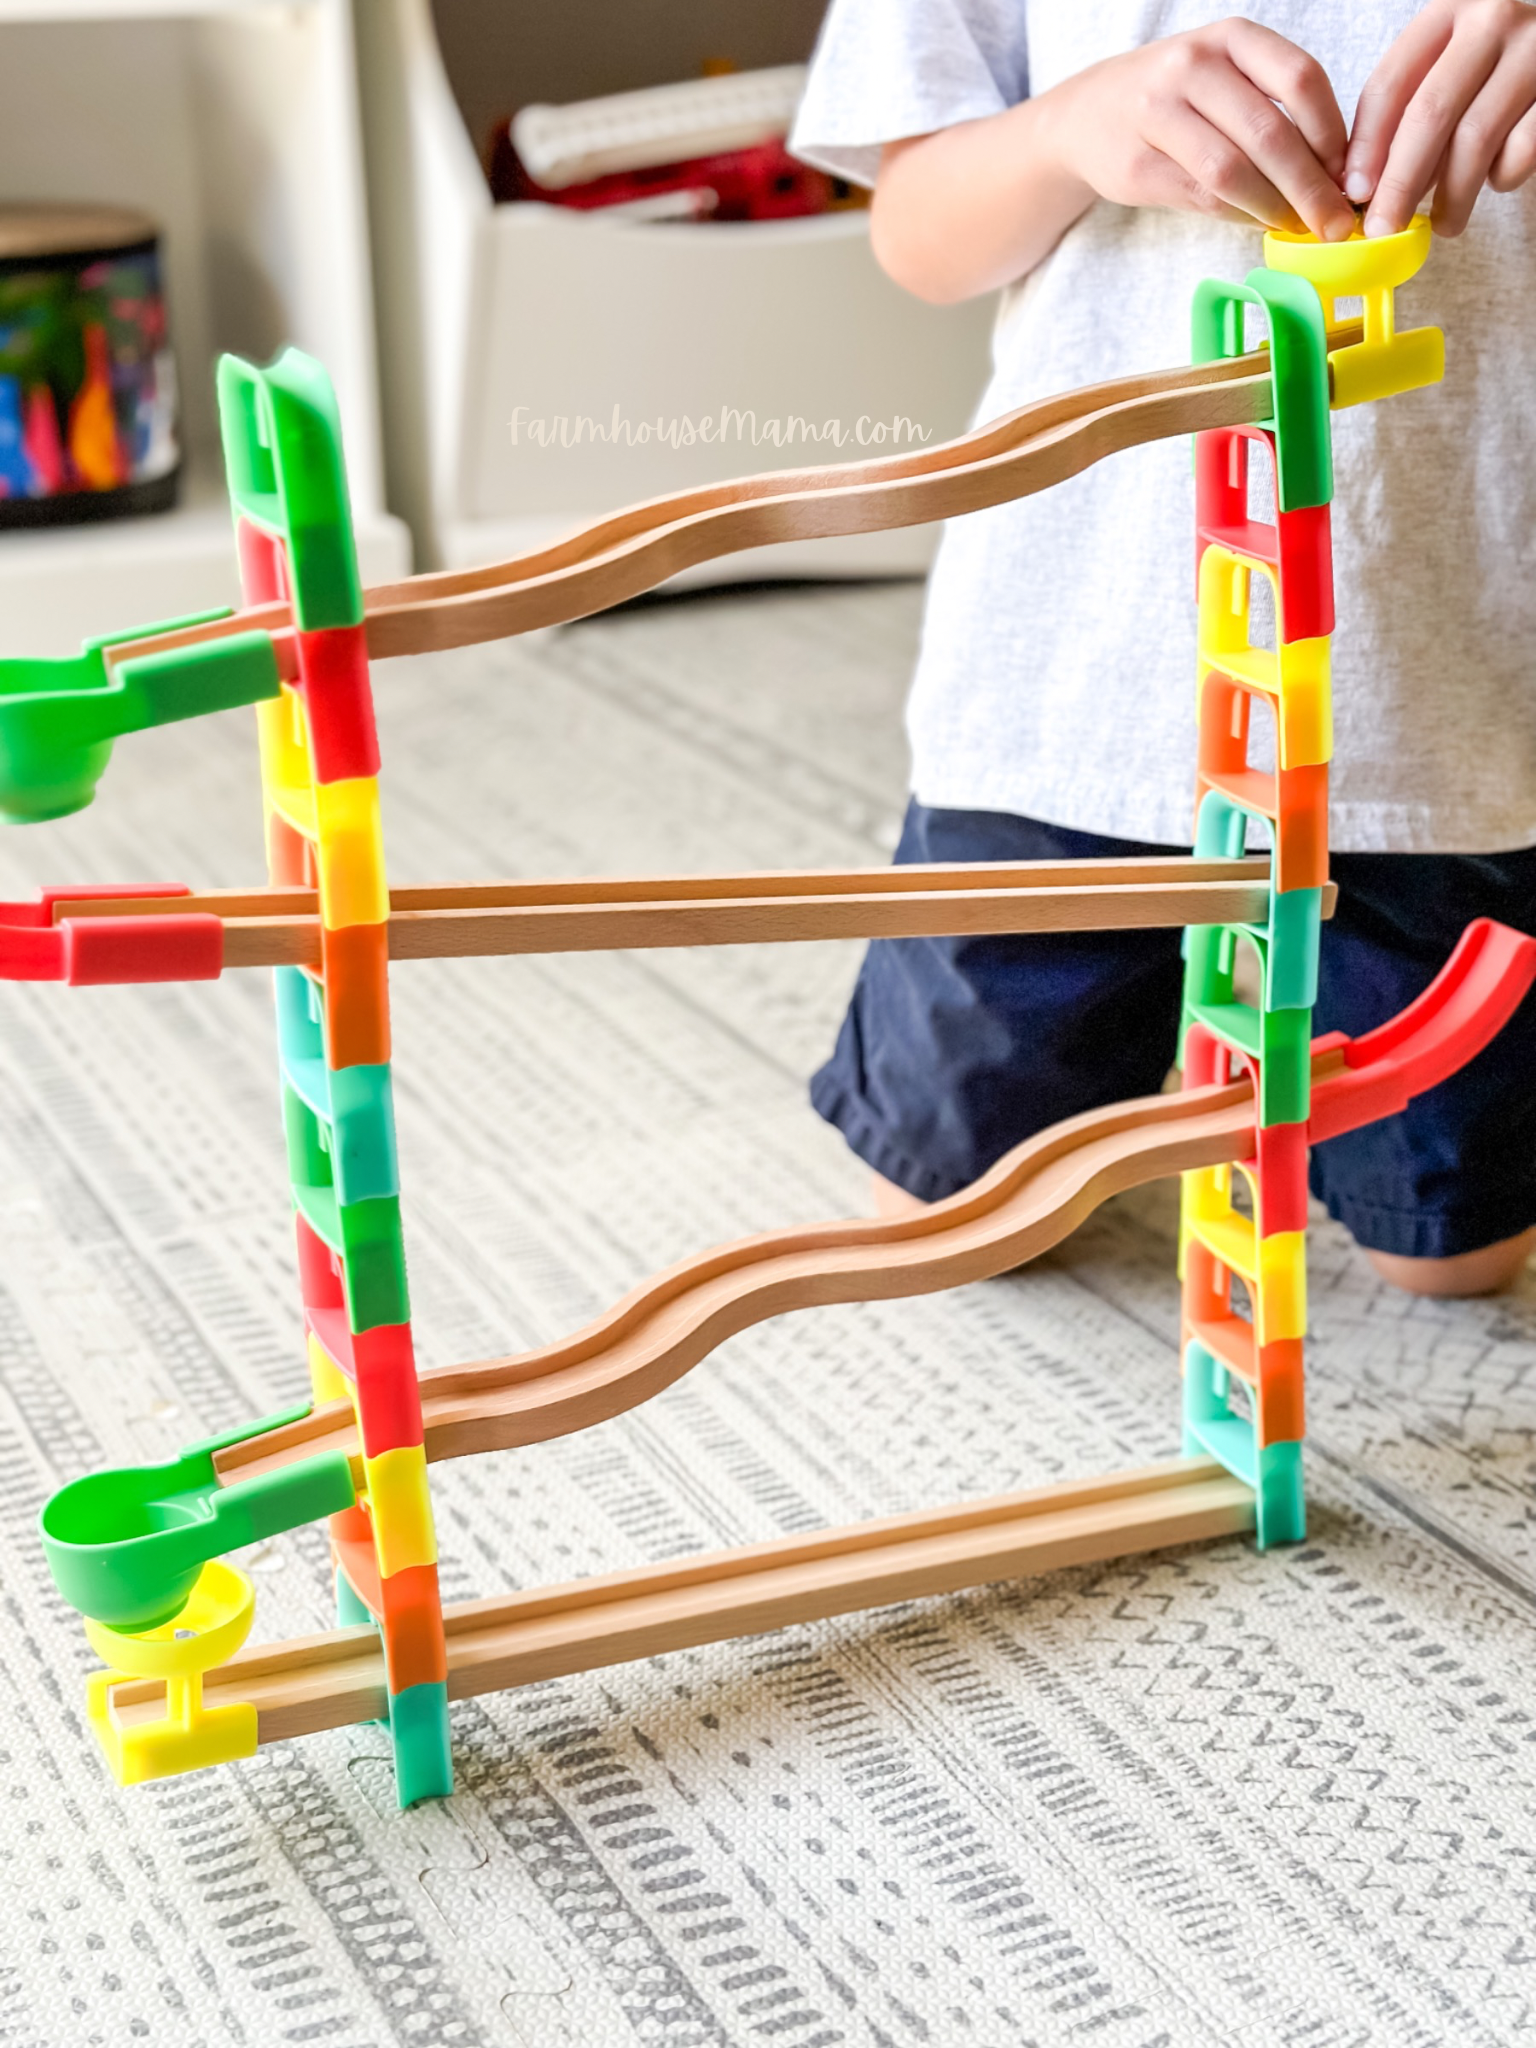 The Planner Play Kit Lovevery Blog Review Blogger Lovevery play kits for 4 year olds stem toys math physics games learning toys learning through play marble run